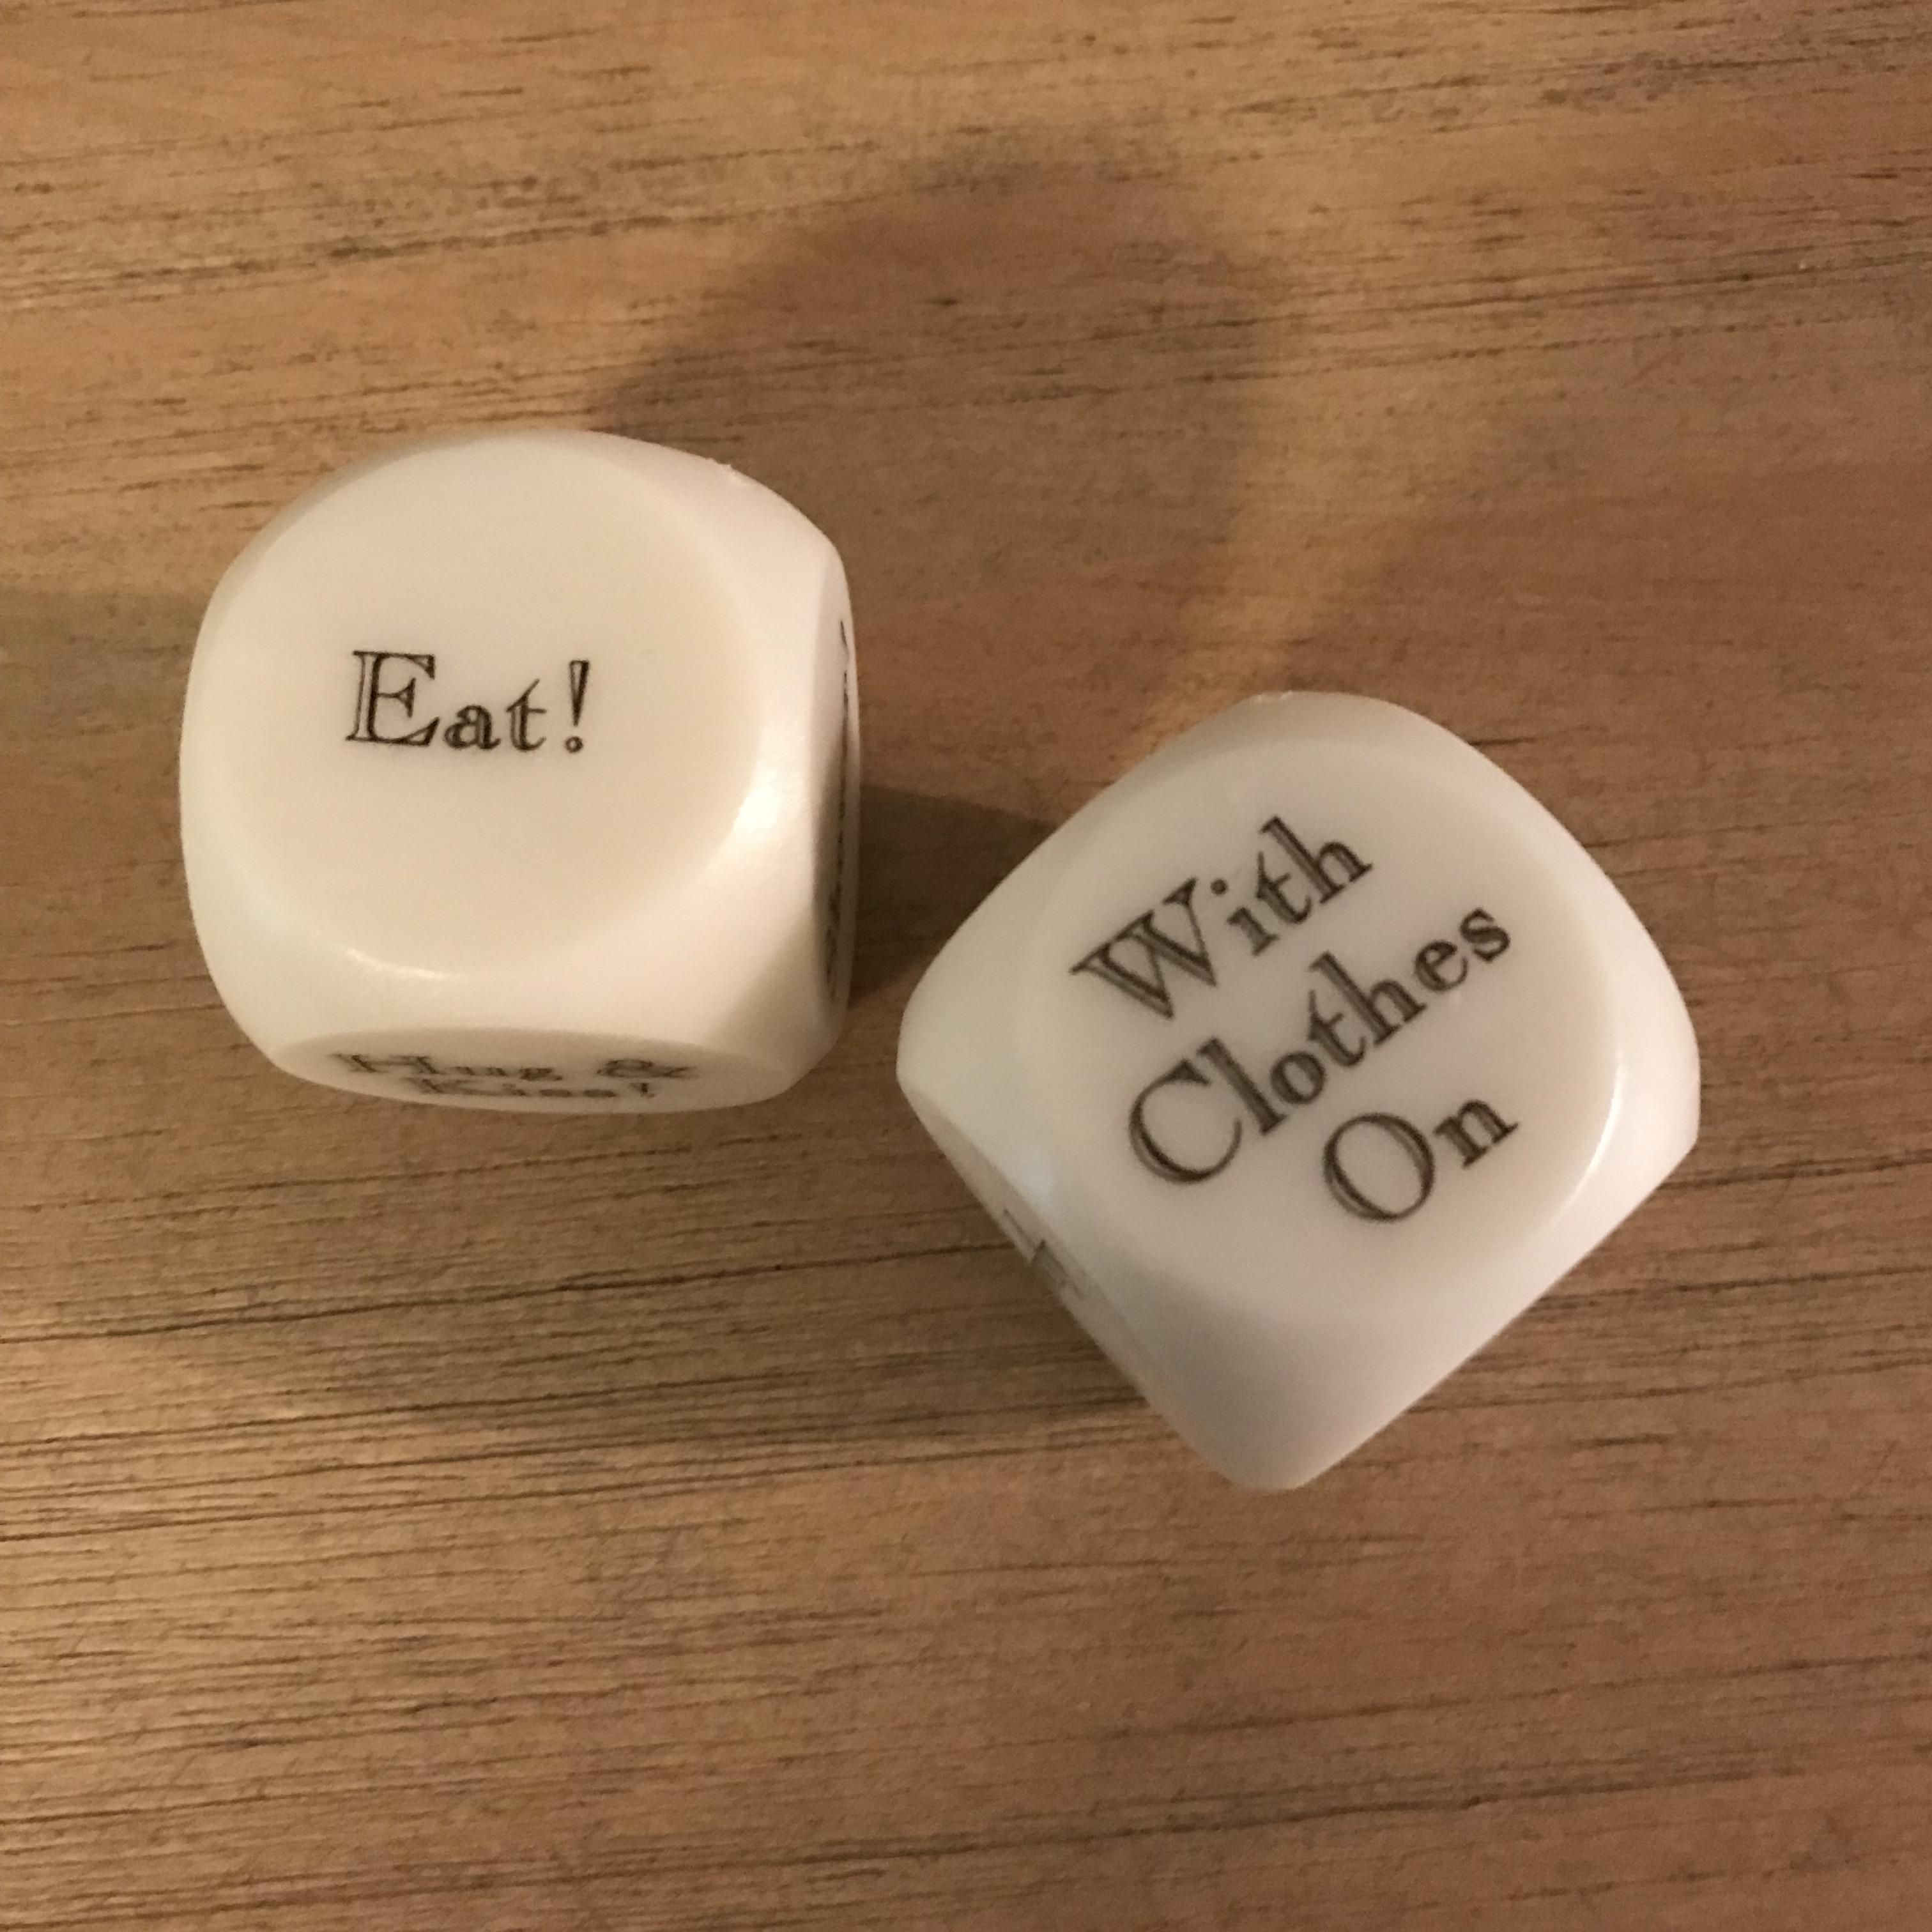 My sex dice know me too well..